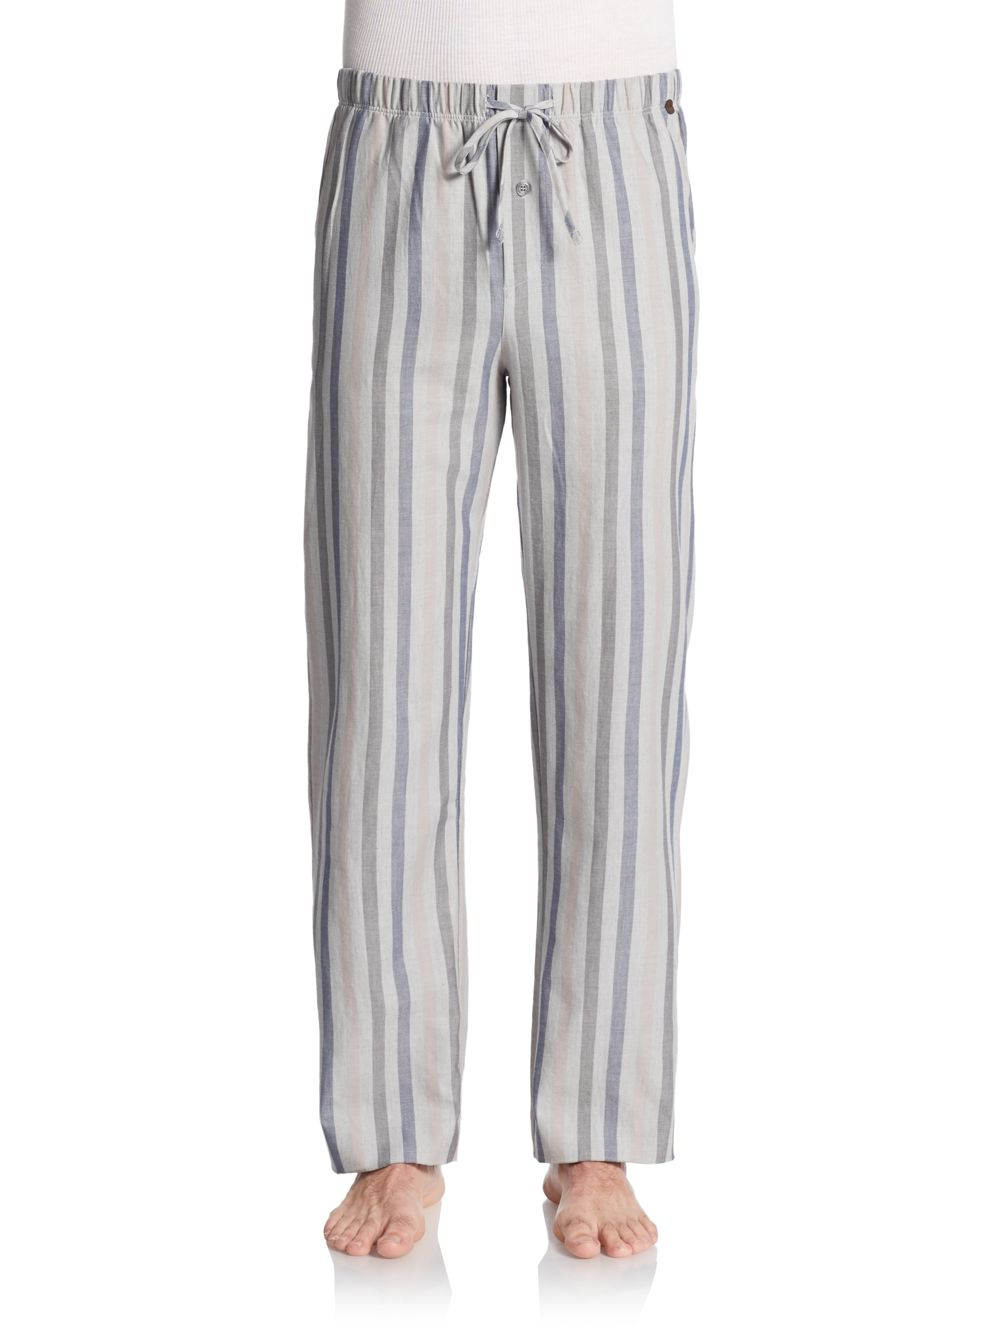 Hanro Striped Cotton Drawstring Pants in Gray for Men | Lyst